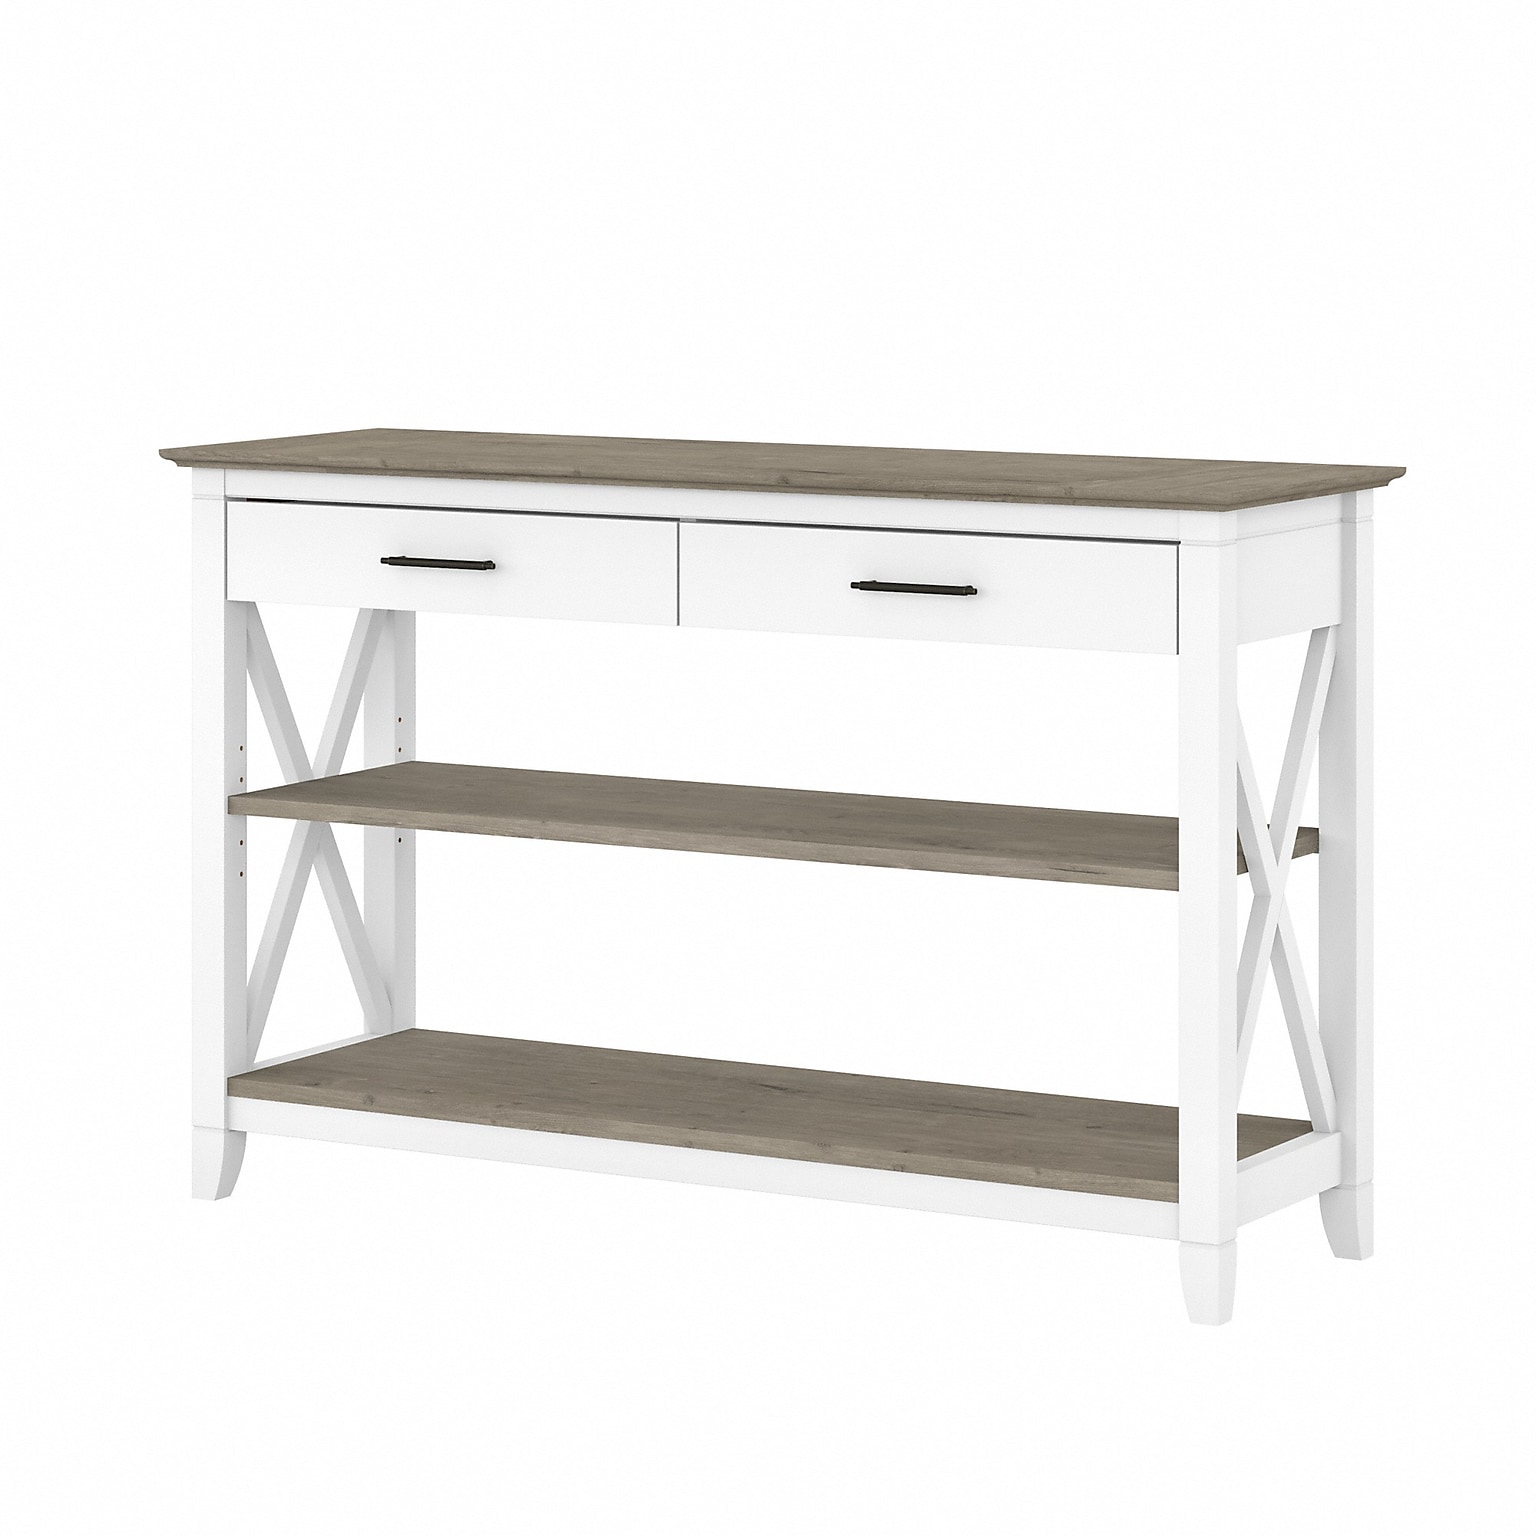 Bush Furniture Key West 47 x 16 Console Table with Drawers and Shelves, Shiplap Gray/Pure White (KWT248G2W-03)